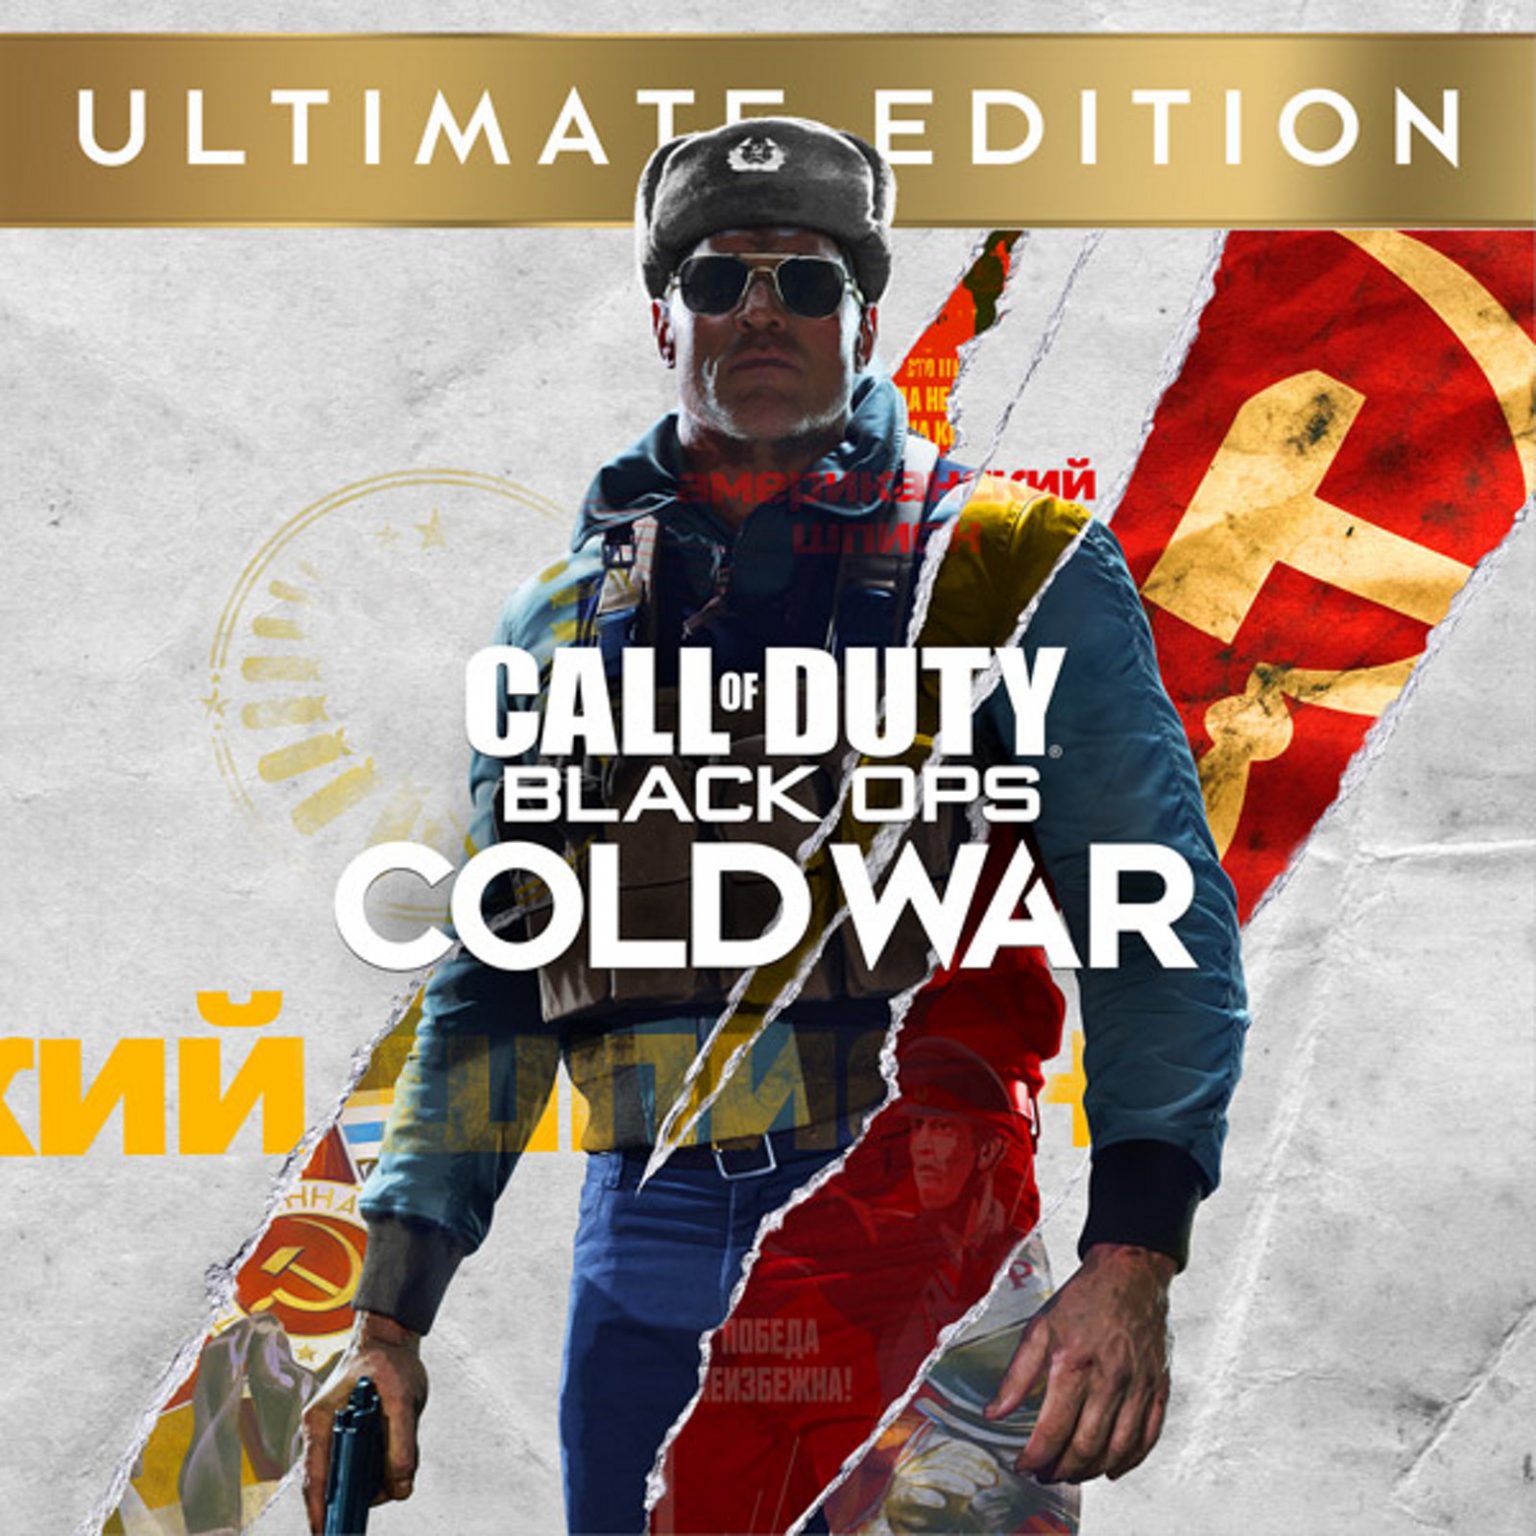 call of duty cold war ultimate edition release date